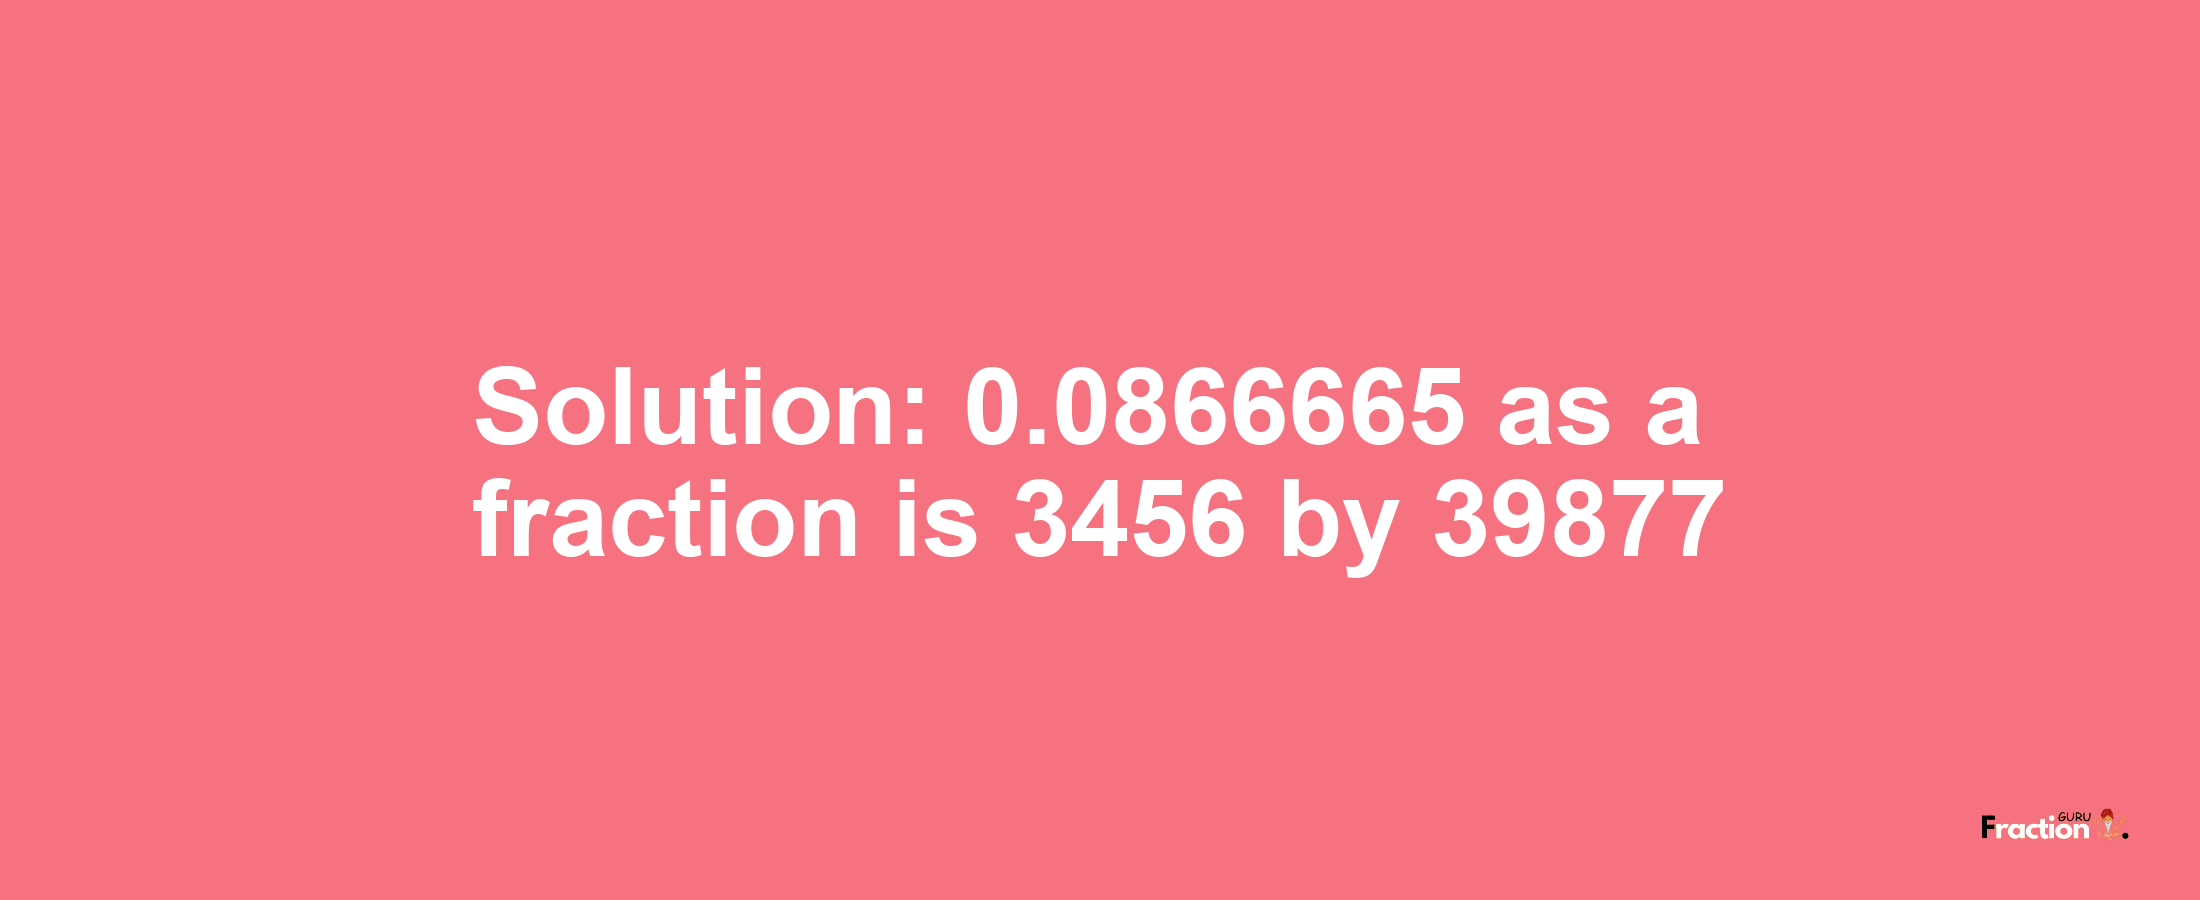 Solution:0.0866665 as a fraction is 3456/39877